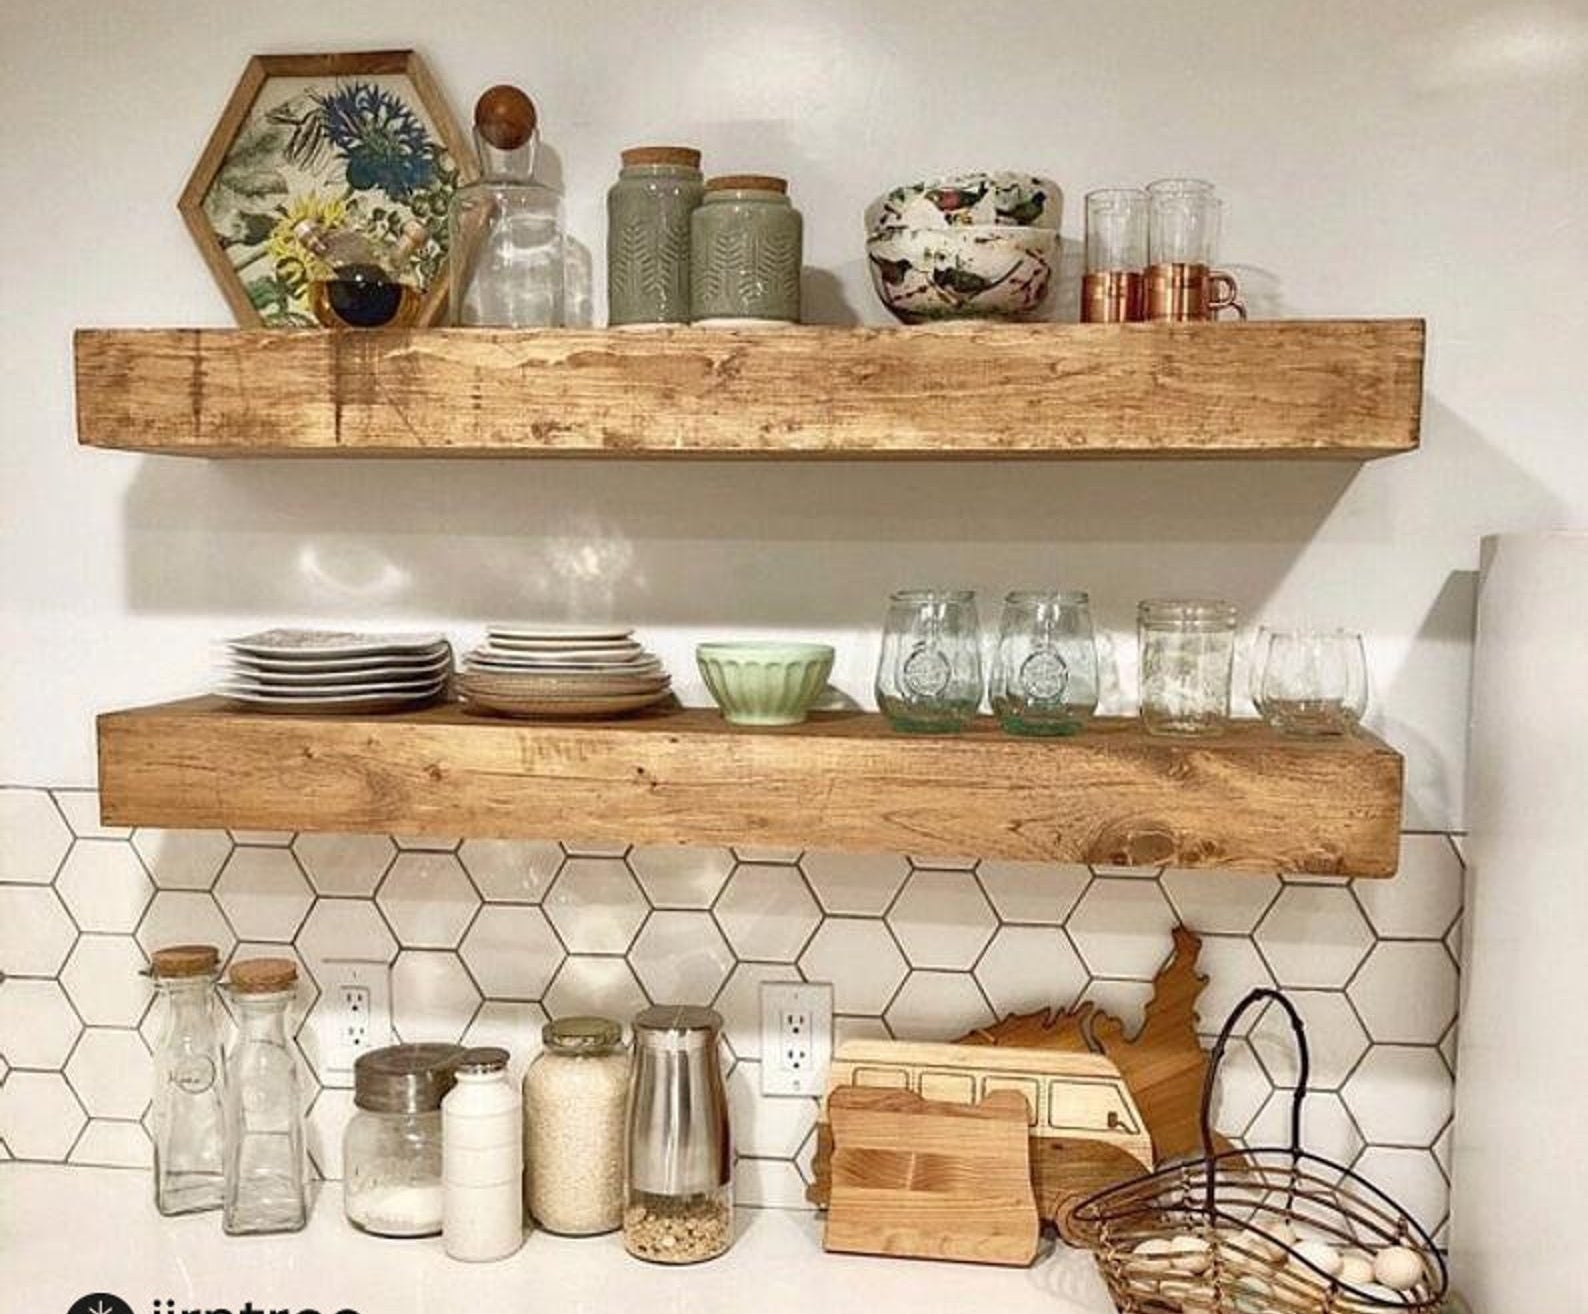 28 Kitchen Organizers If You're Ready To Tidy Up